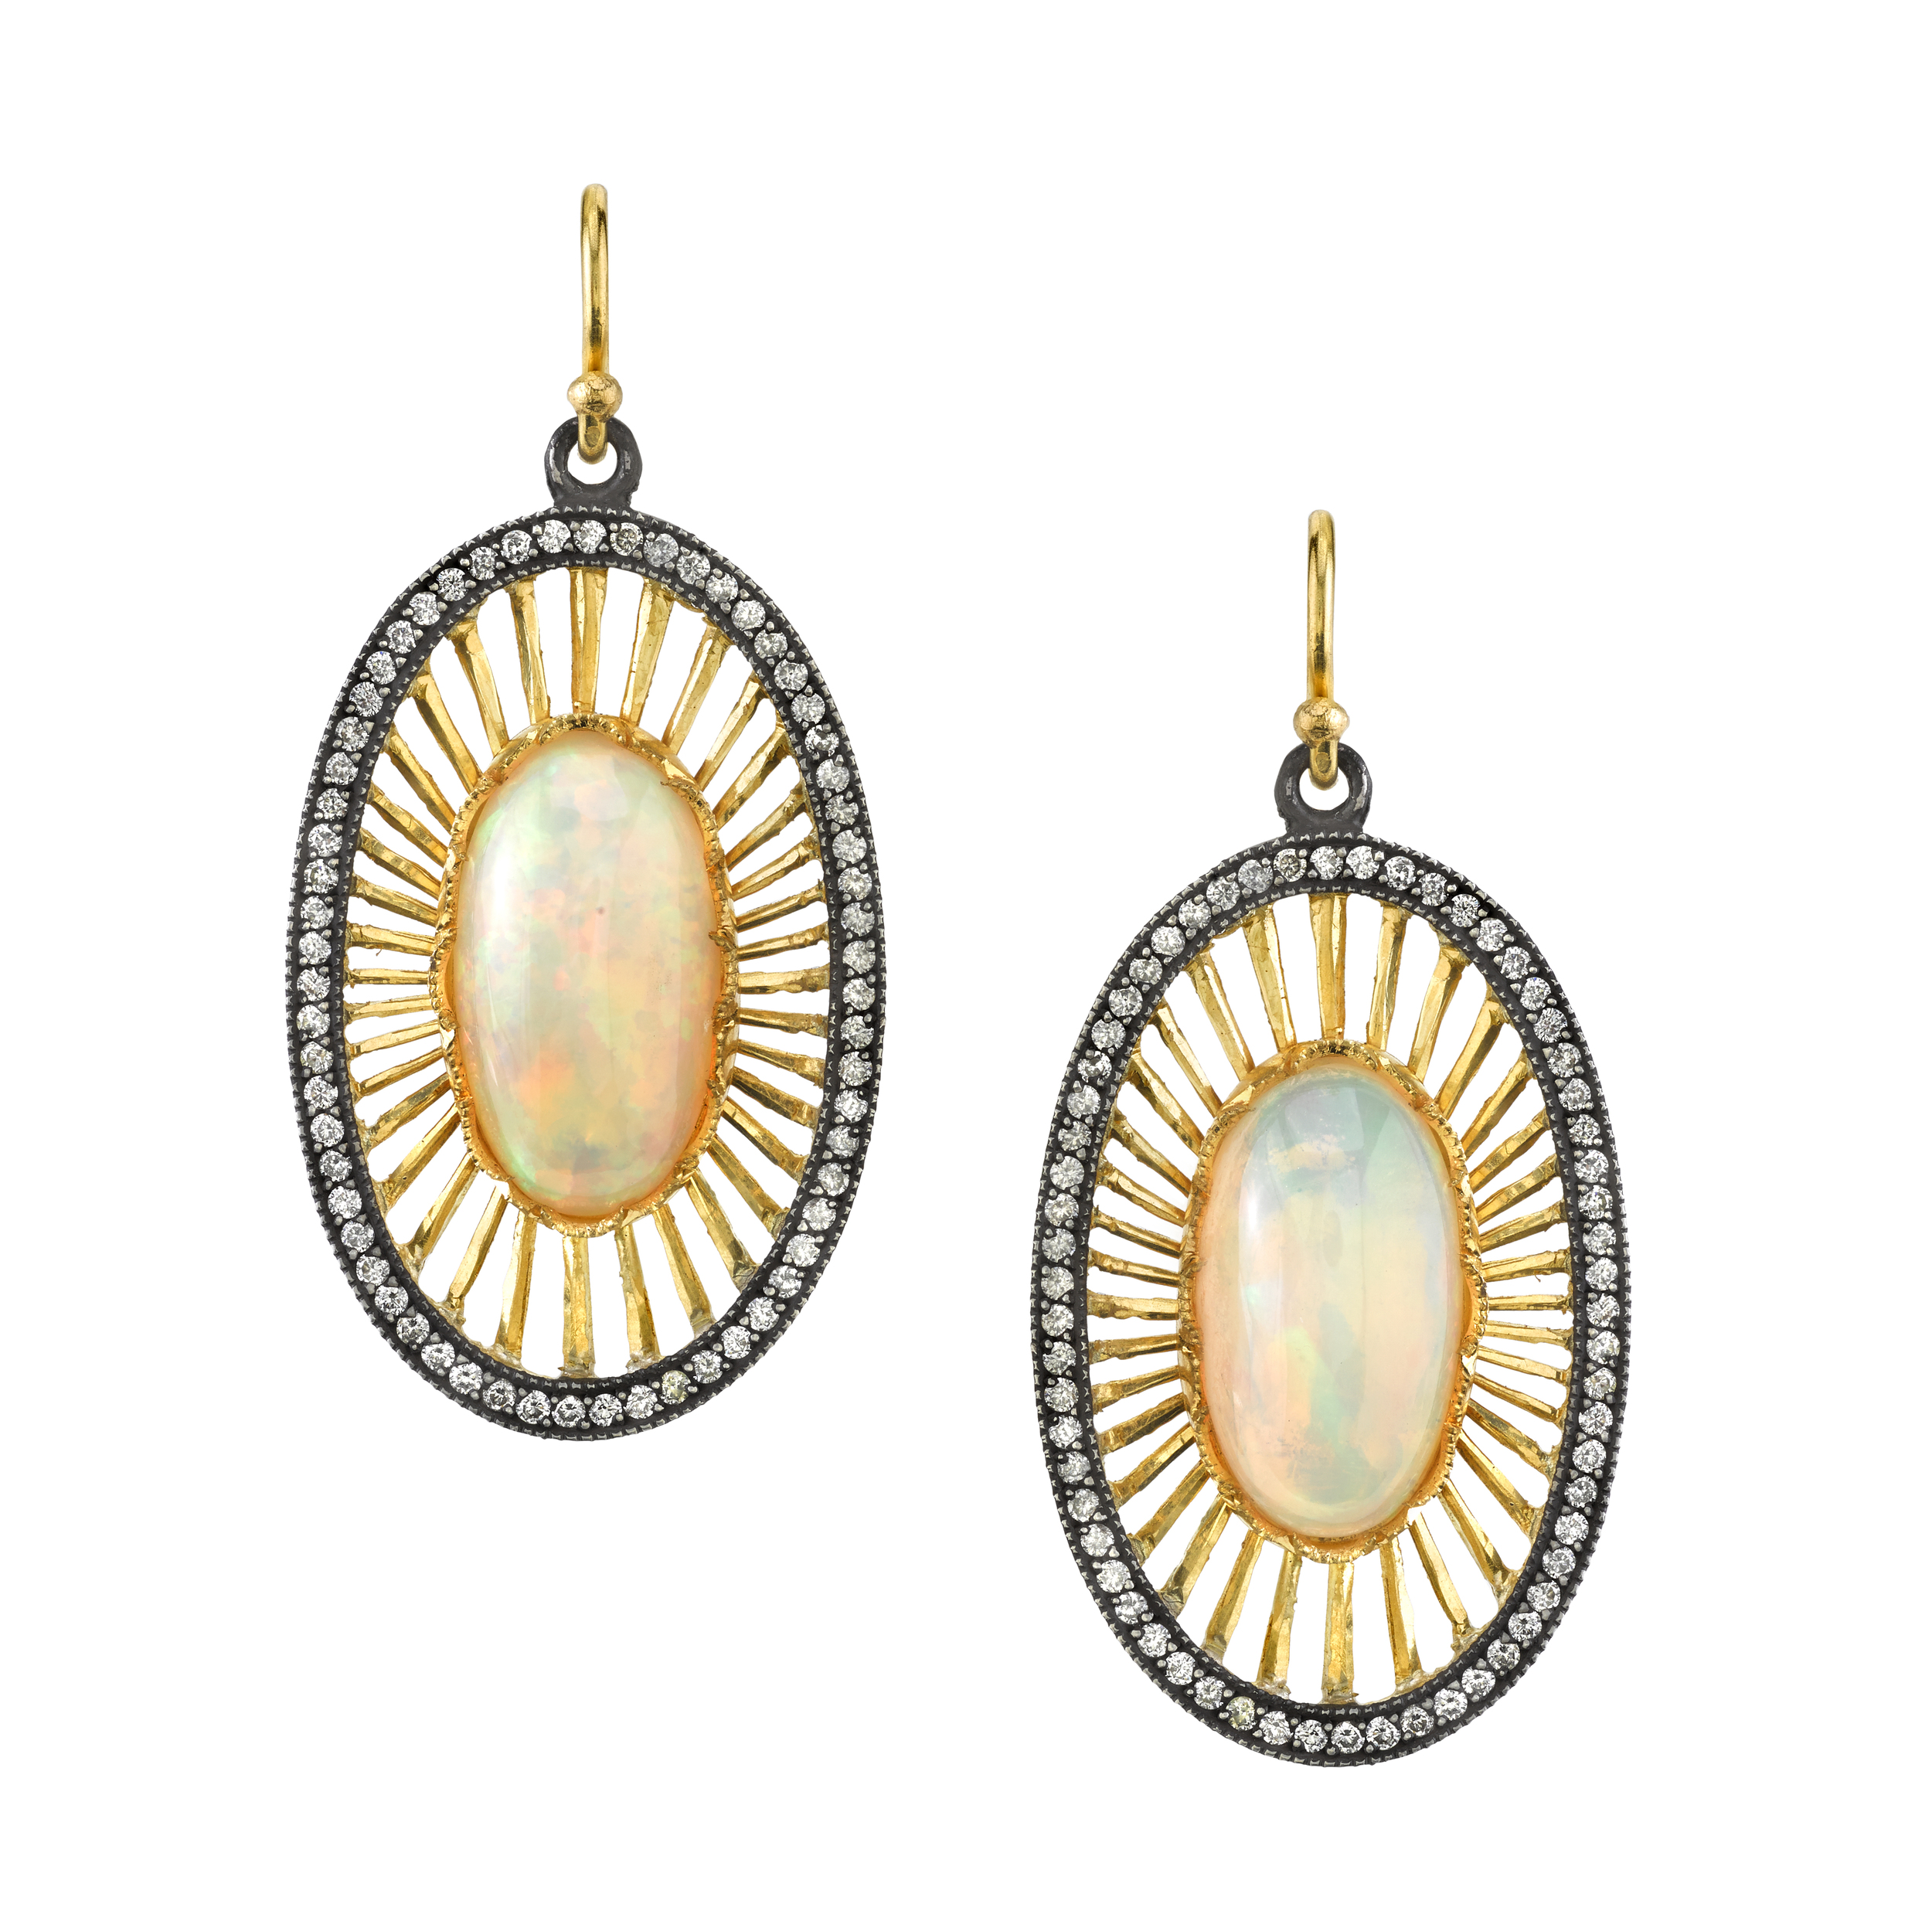  22K gold and silver Ethiopian opal oval Deco earrings, $18,820.&nbsp; 